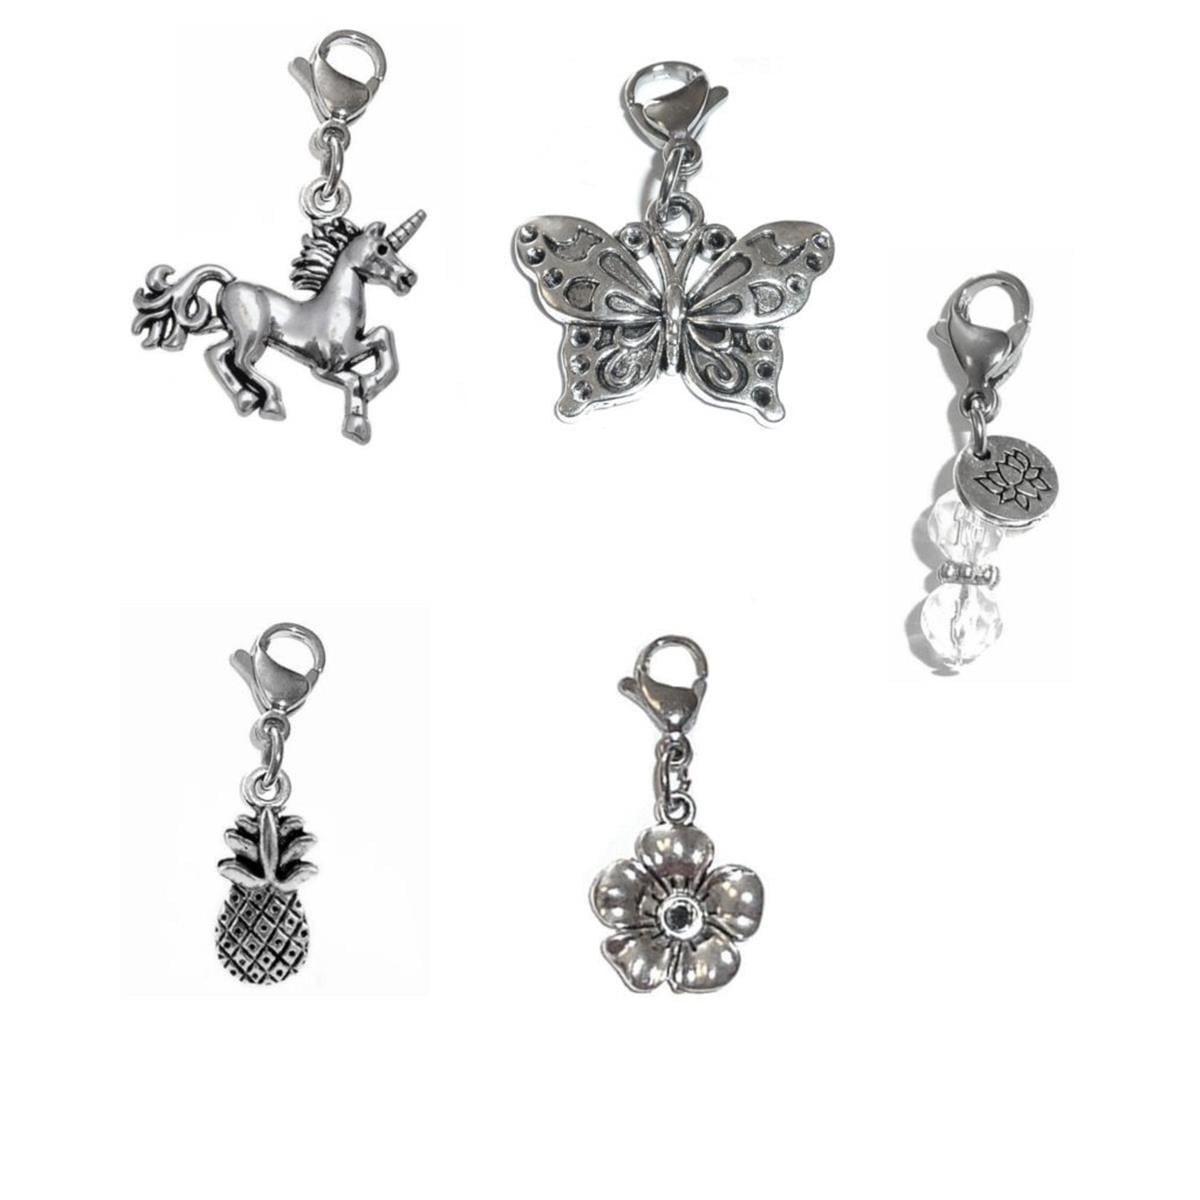 Charms Clip On Perfect For Bracelet Or Necklace Zipper Pull Charm Bag Purse Charm Easy To Use DIY 4 Pack Whimsical Mix e2a9a12c 9c2e 4cd6 99c6 37c3e30abb9b 1.a8c82f0c2f0aa827c4eb8b69b540a82f